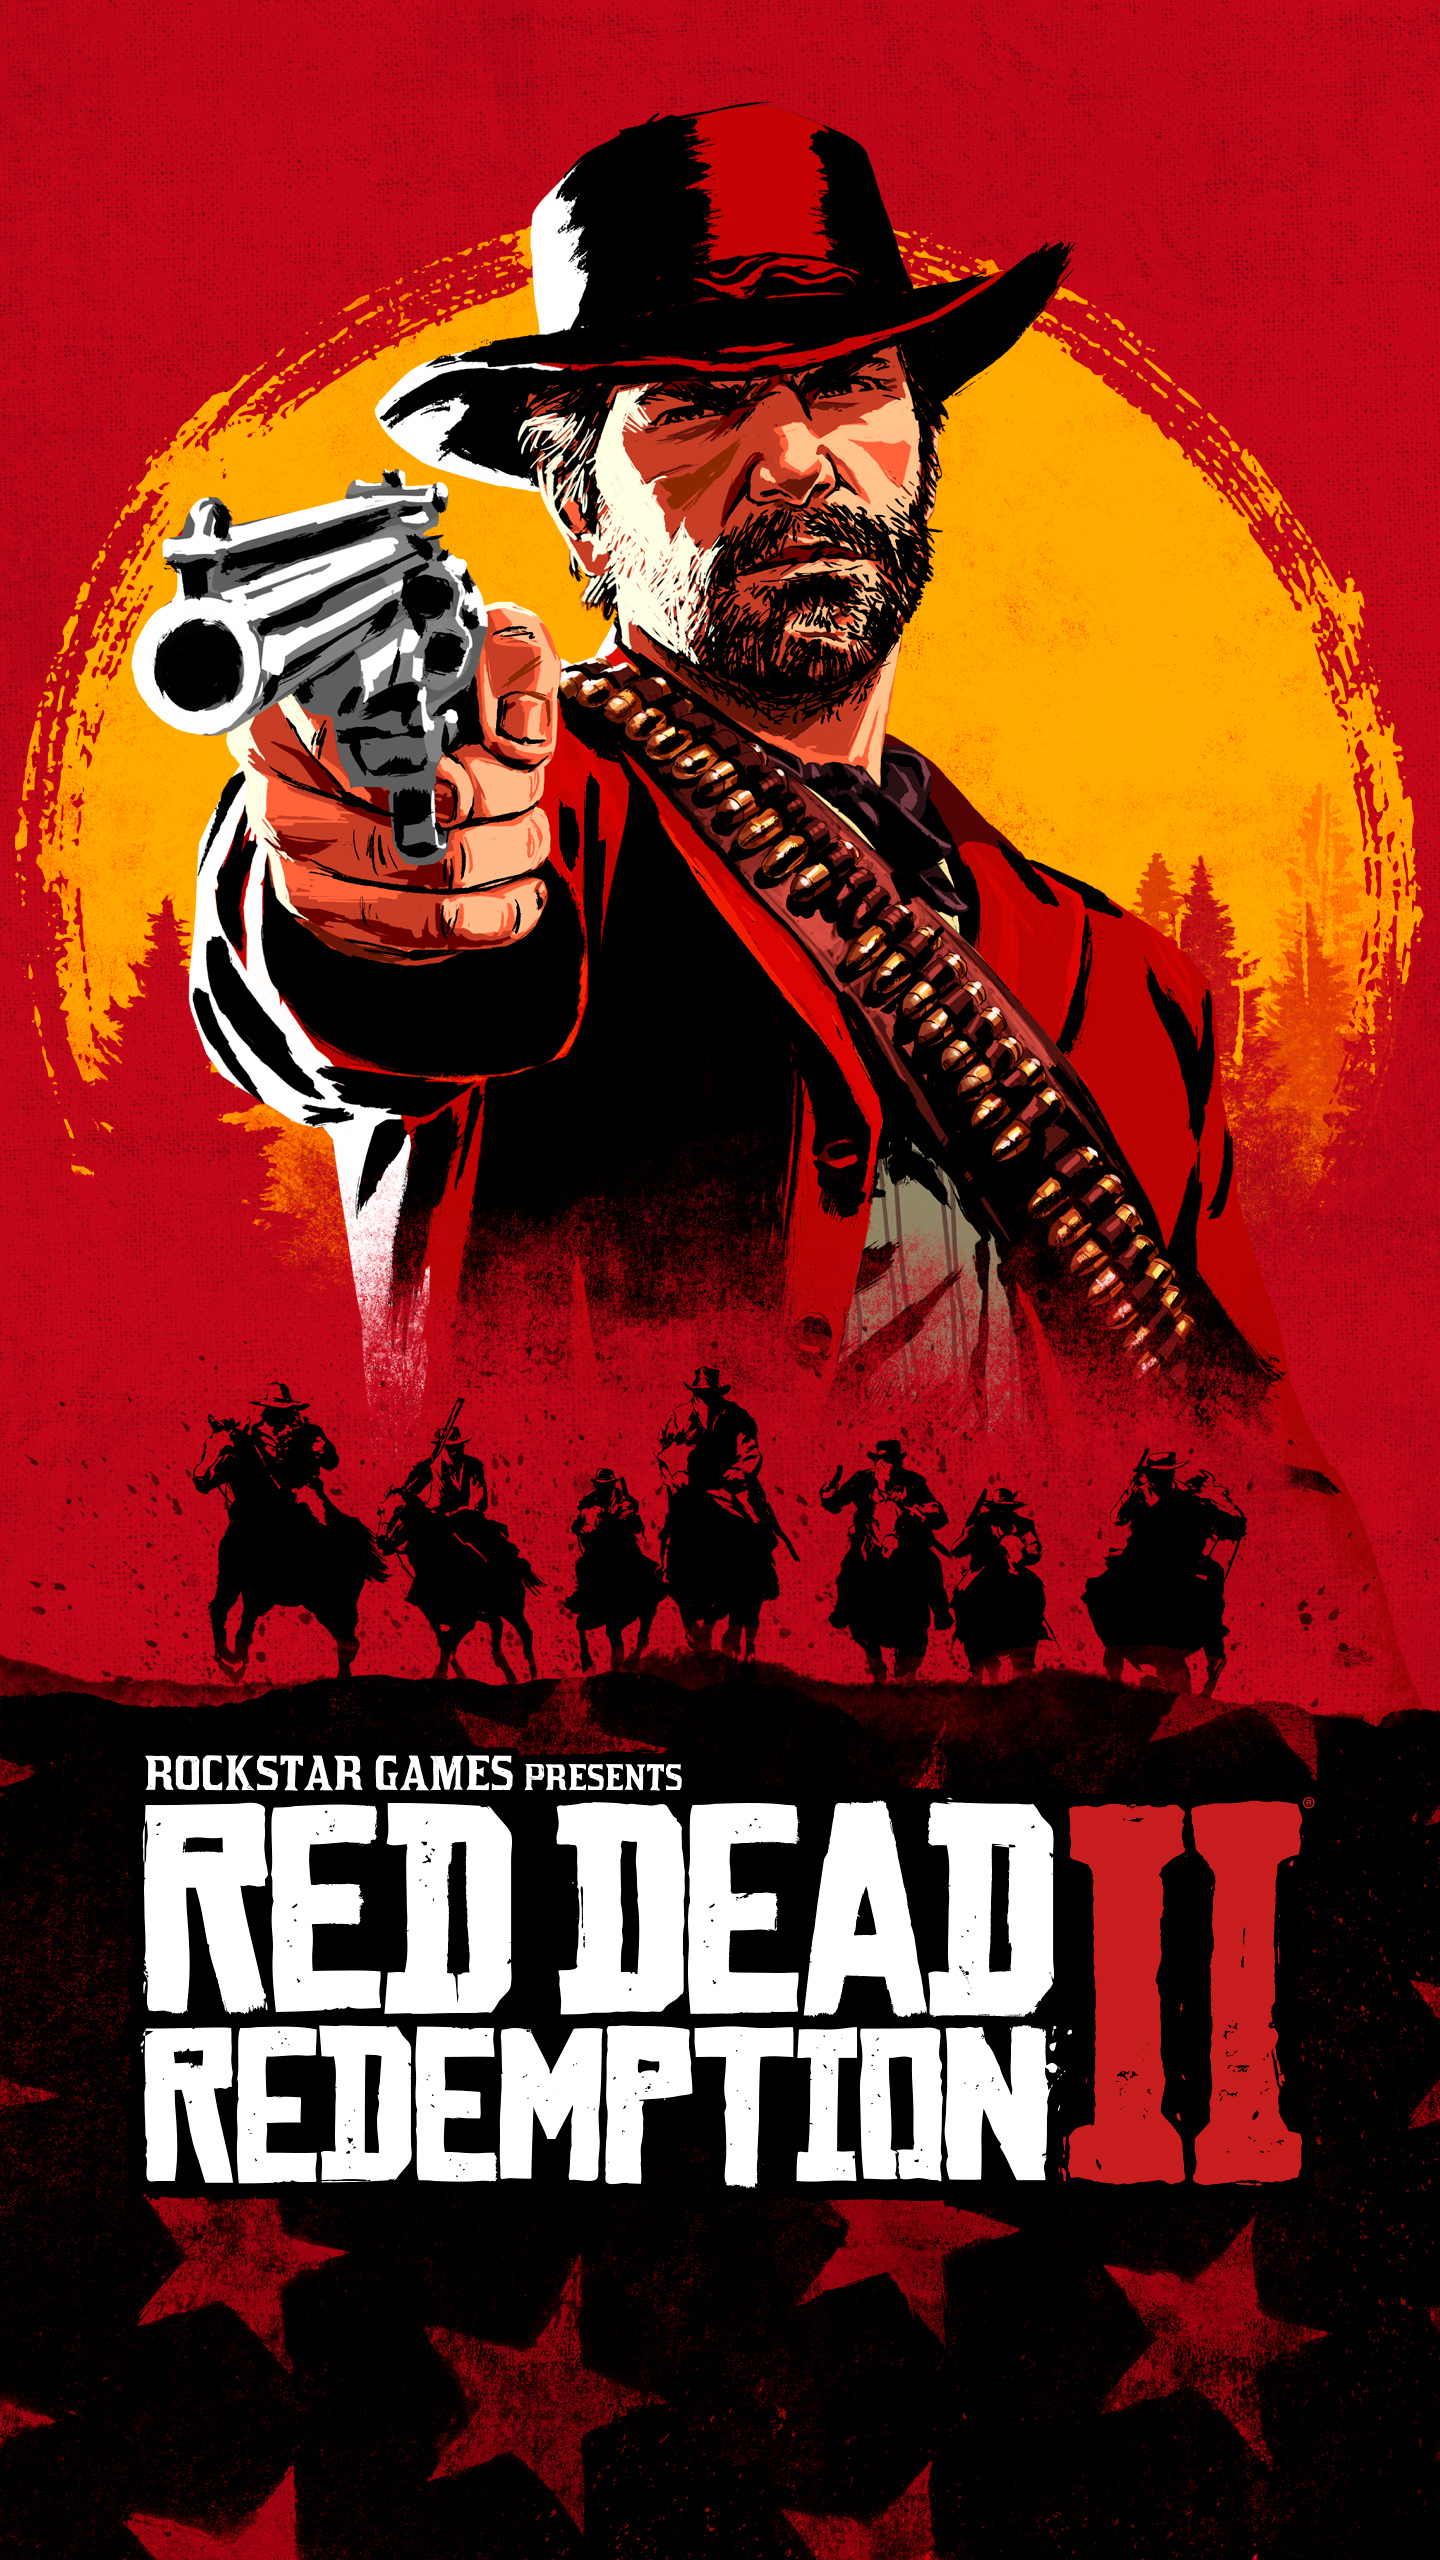 Game  Red dead redemption 2 mobile wallpaper  HD Mobile Walls